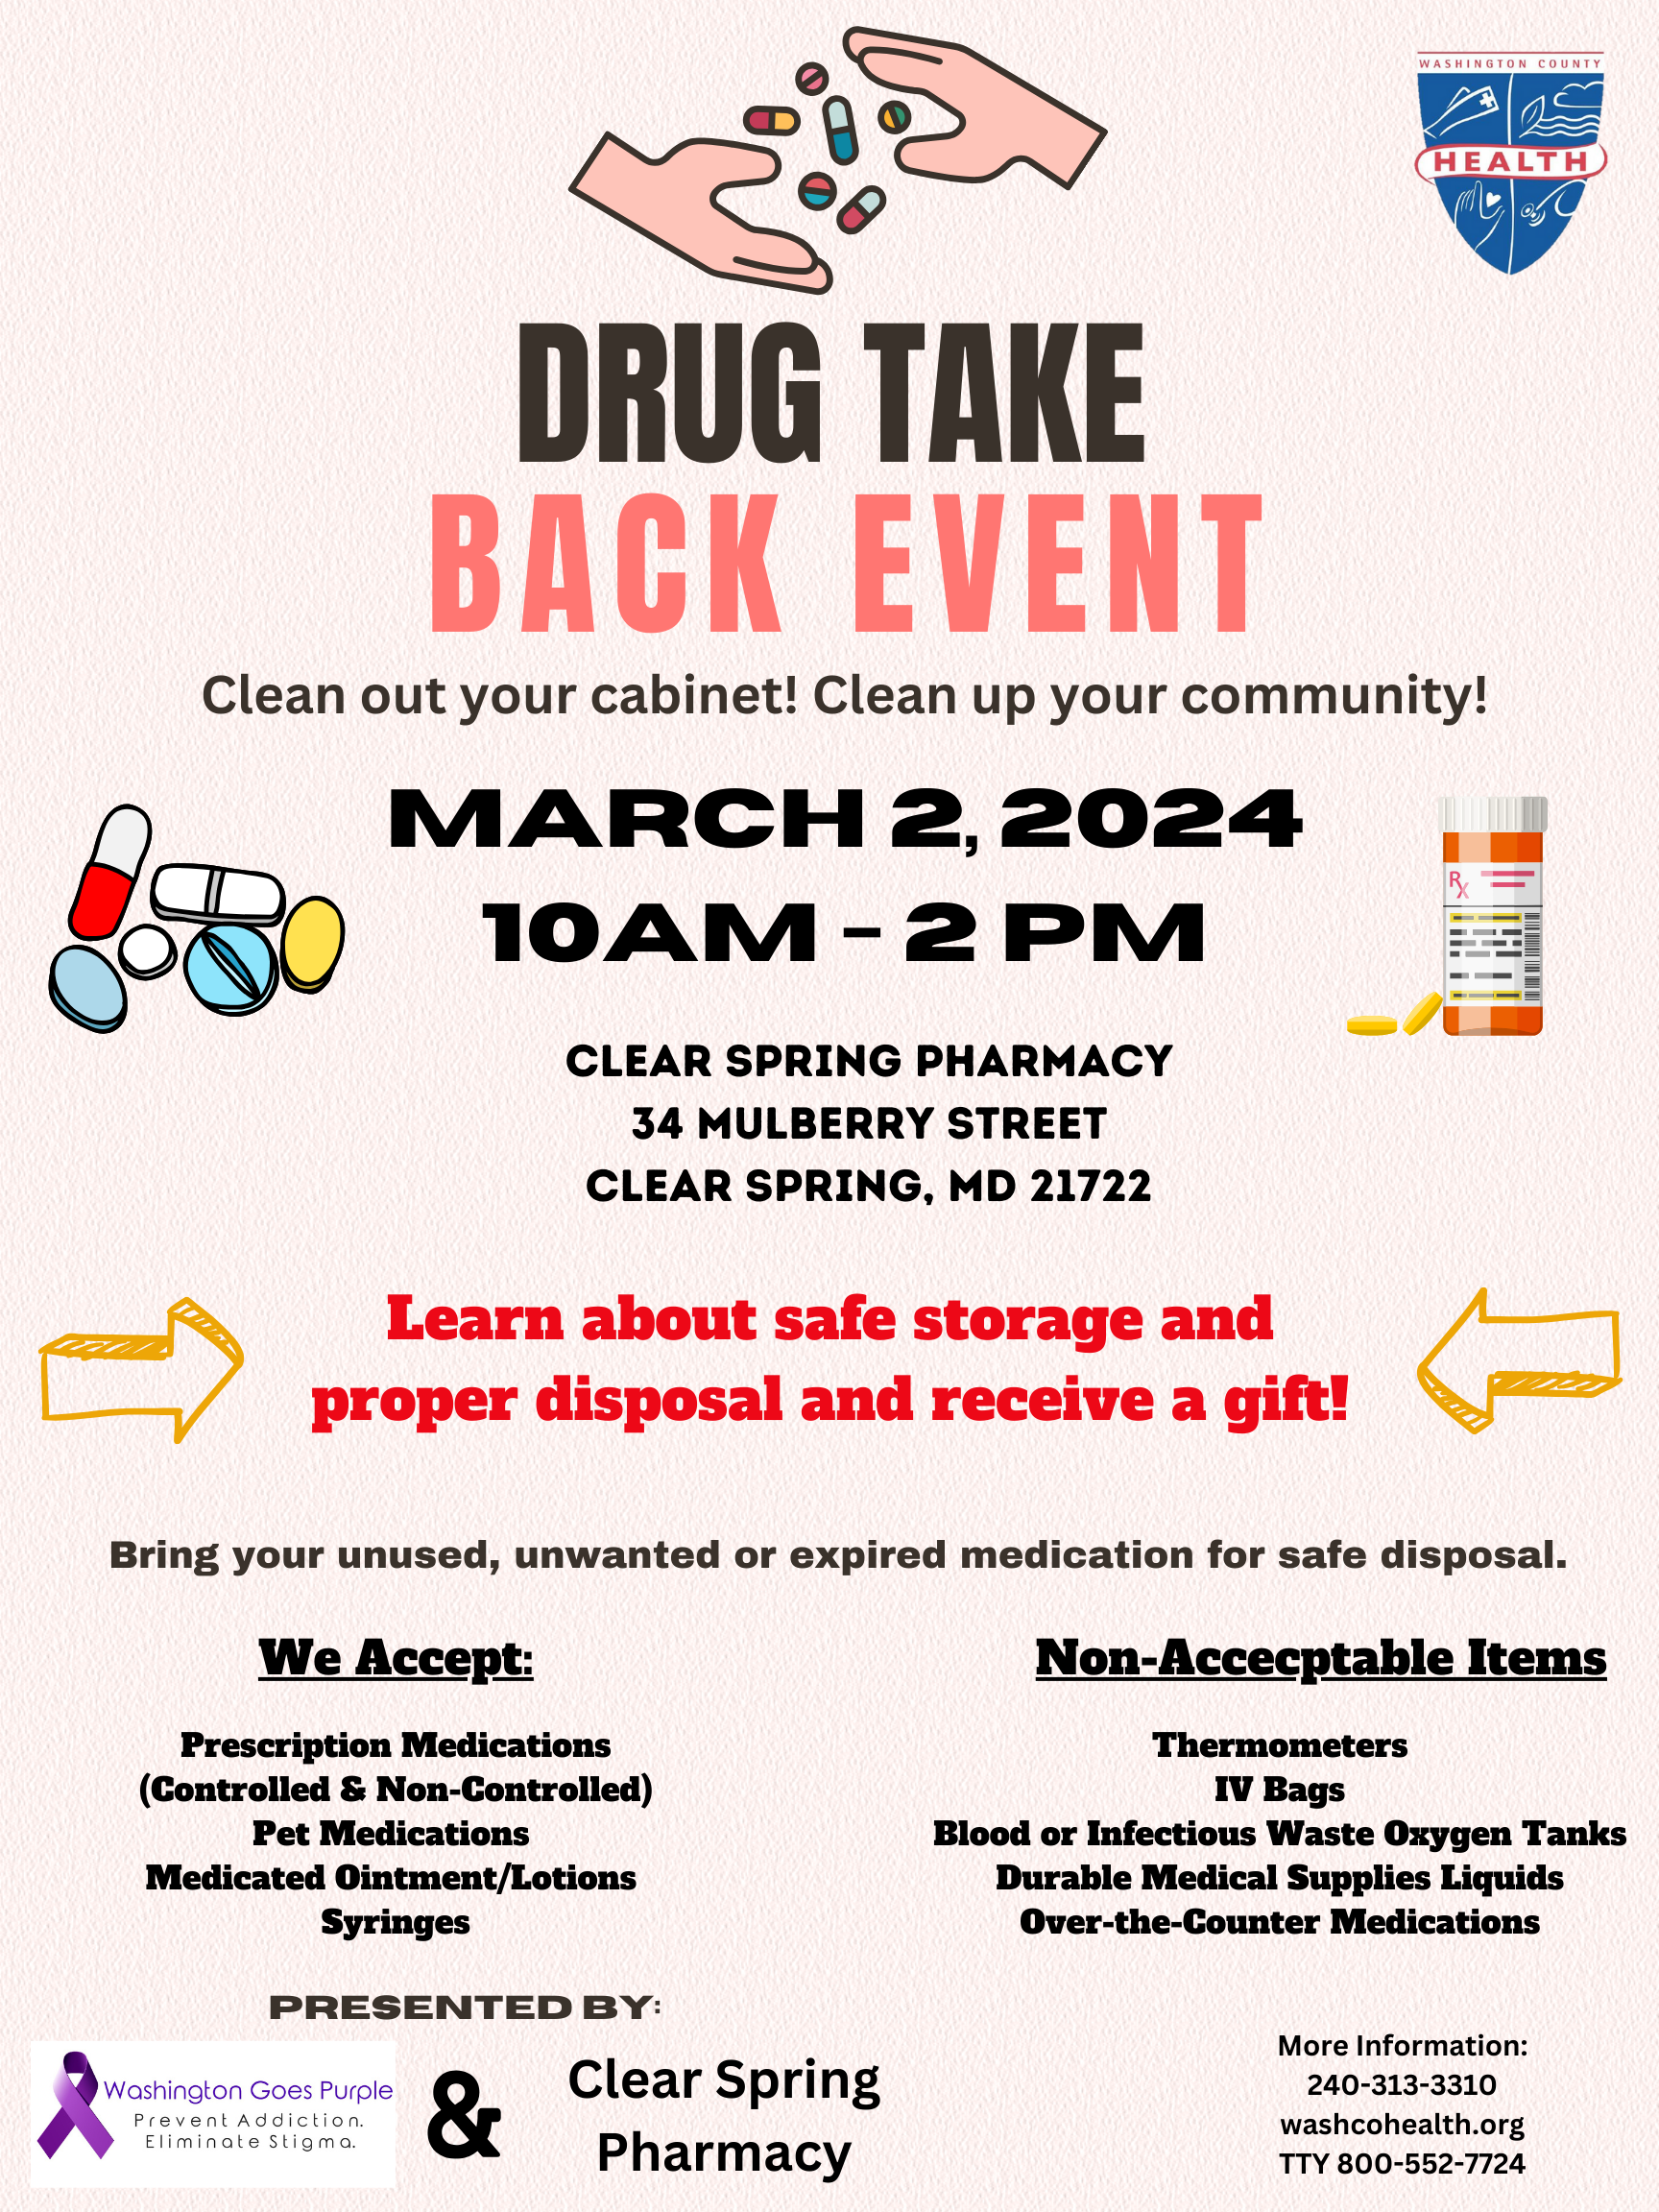 Image: Drug Take Back event flyer; March 2, 10 a.m.-2 p.m.; Clear Spring Pharmacy; logos for pharmacy, health department and Washington Goes Purple; various illustrations of pills and prescription bottles; details in event listing